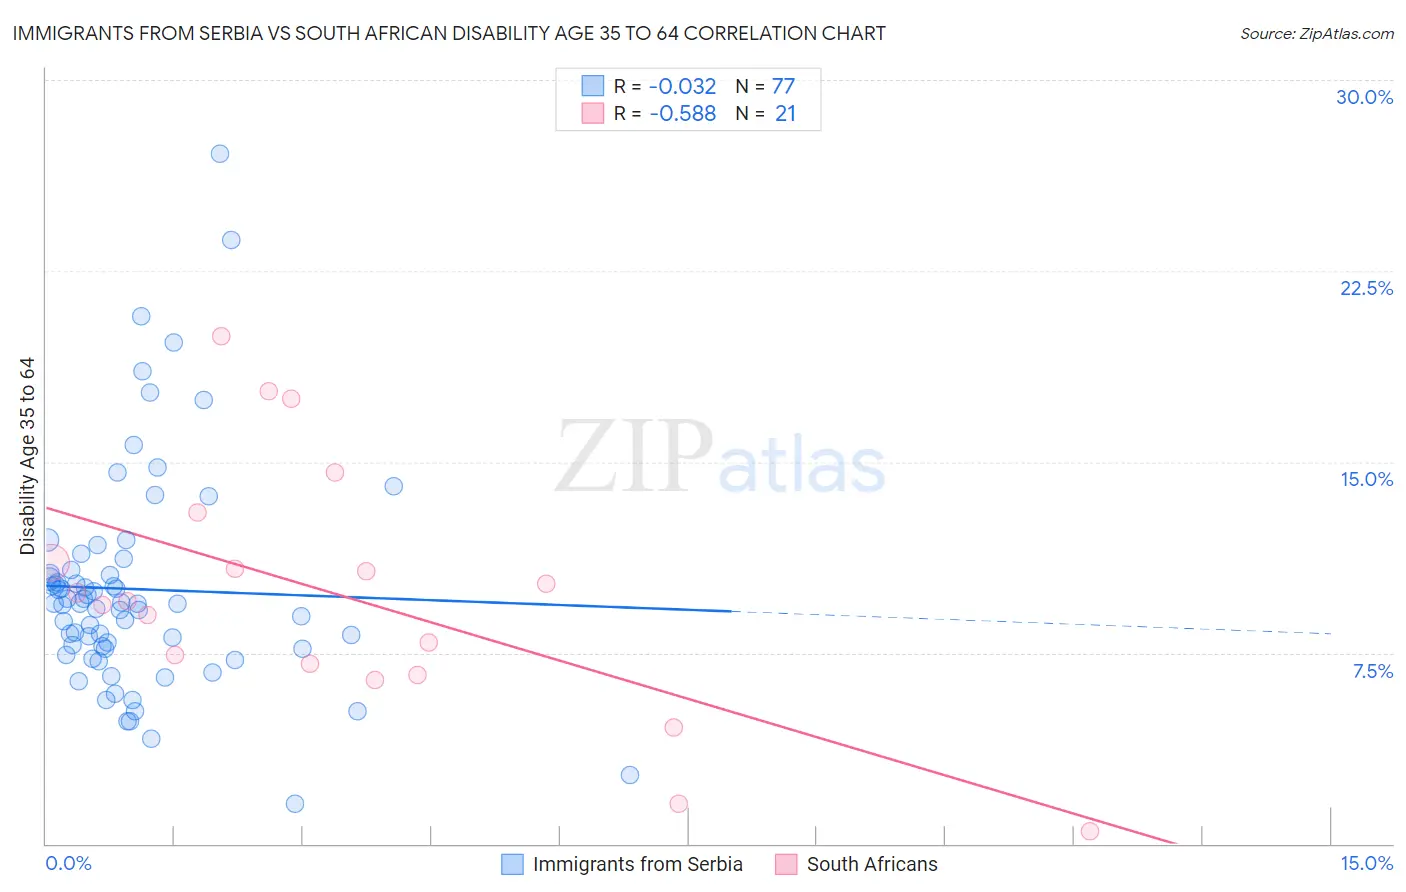 Immigrants from Serbia vs South African Disability Age 35 to 64